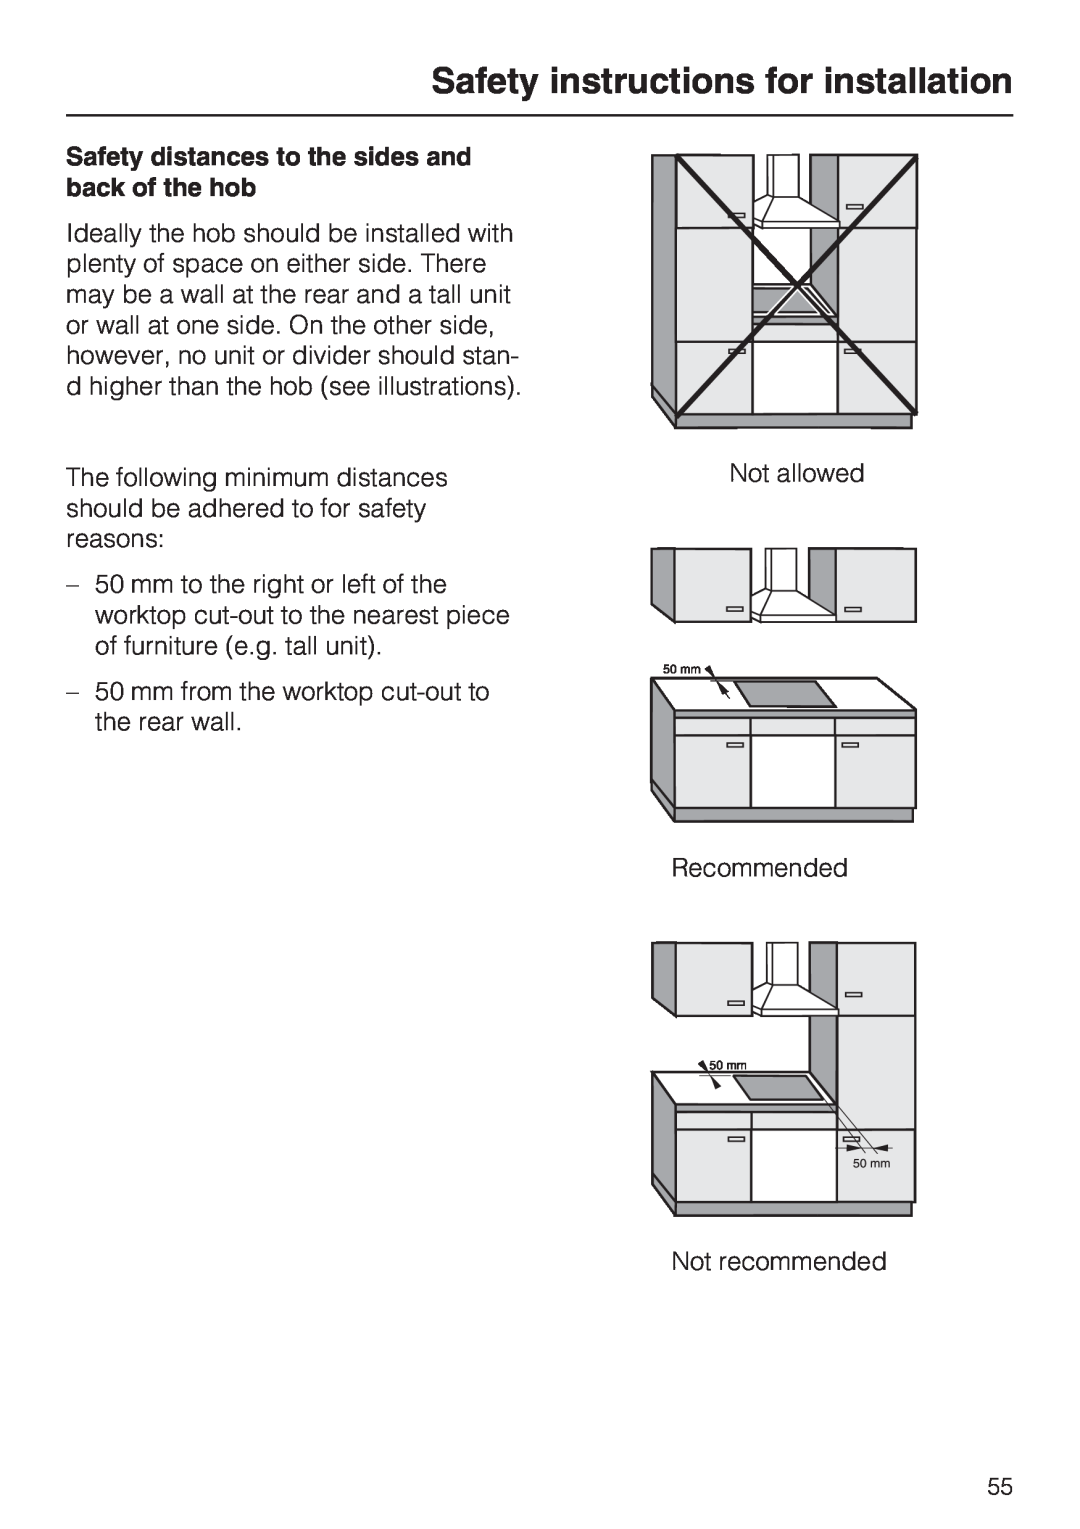 Miele KM5985, KM5956, KM5955, KM5948 Safety distances to the sides and back of the hob, Safety instructions for installation 